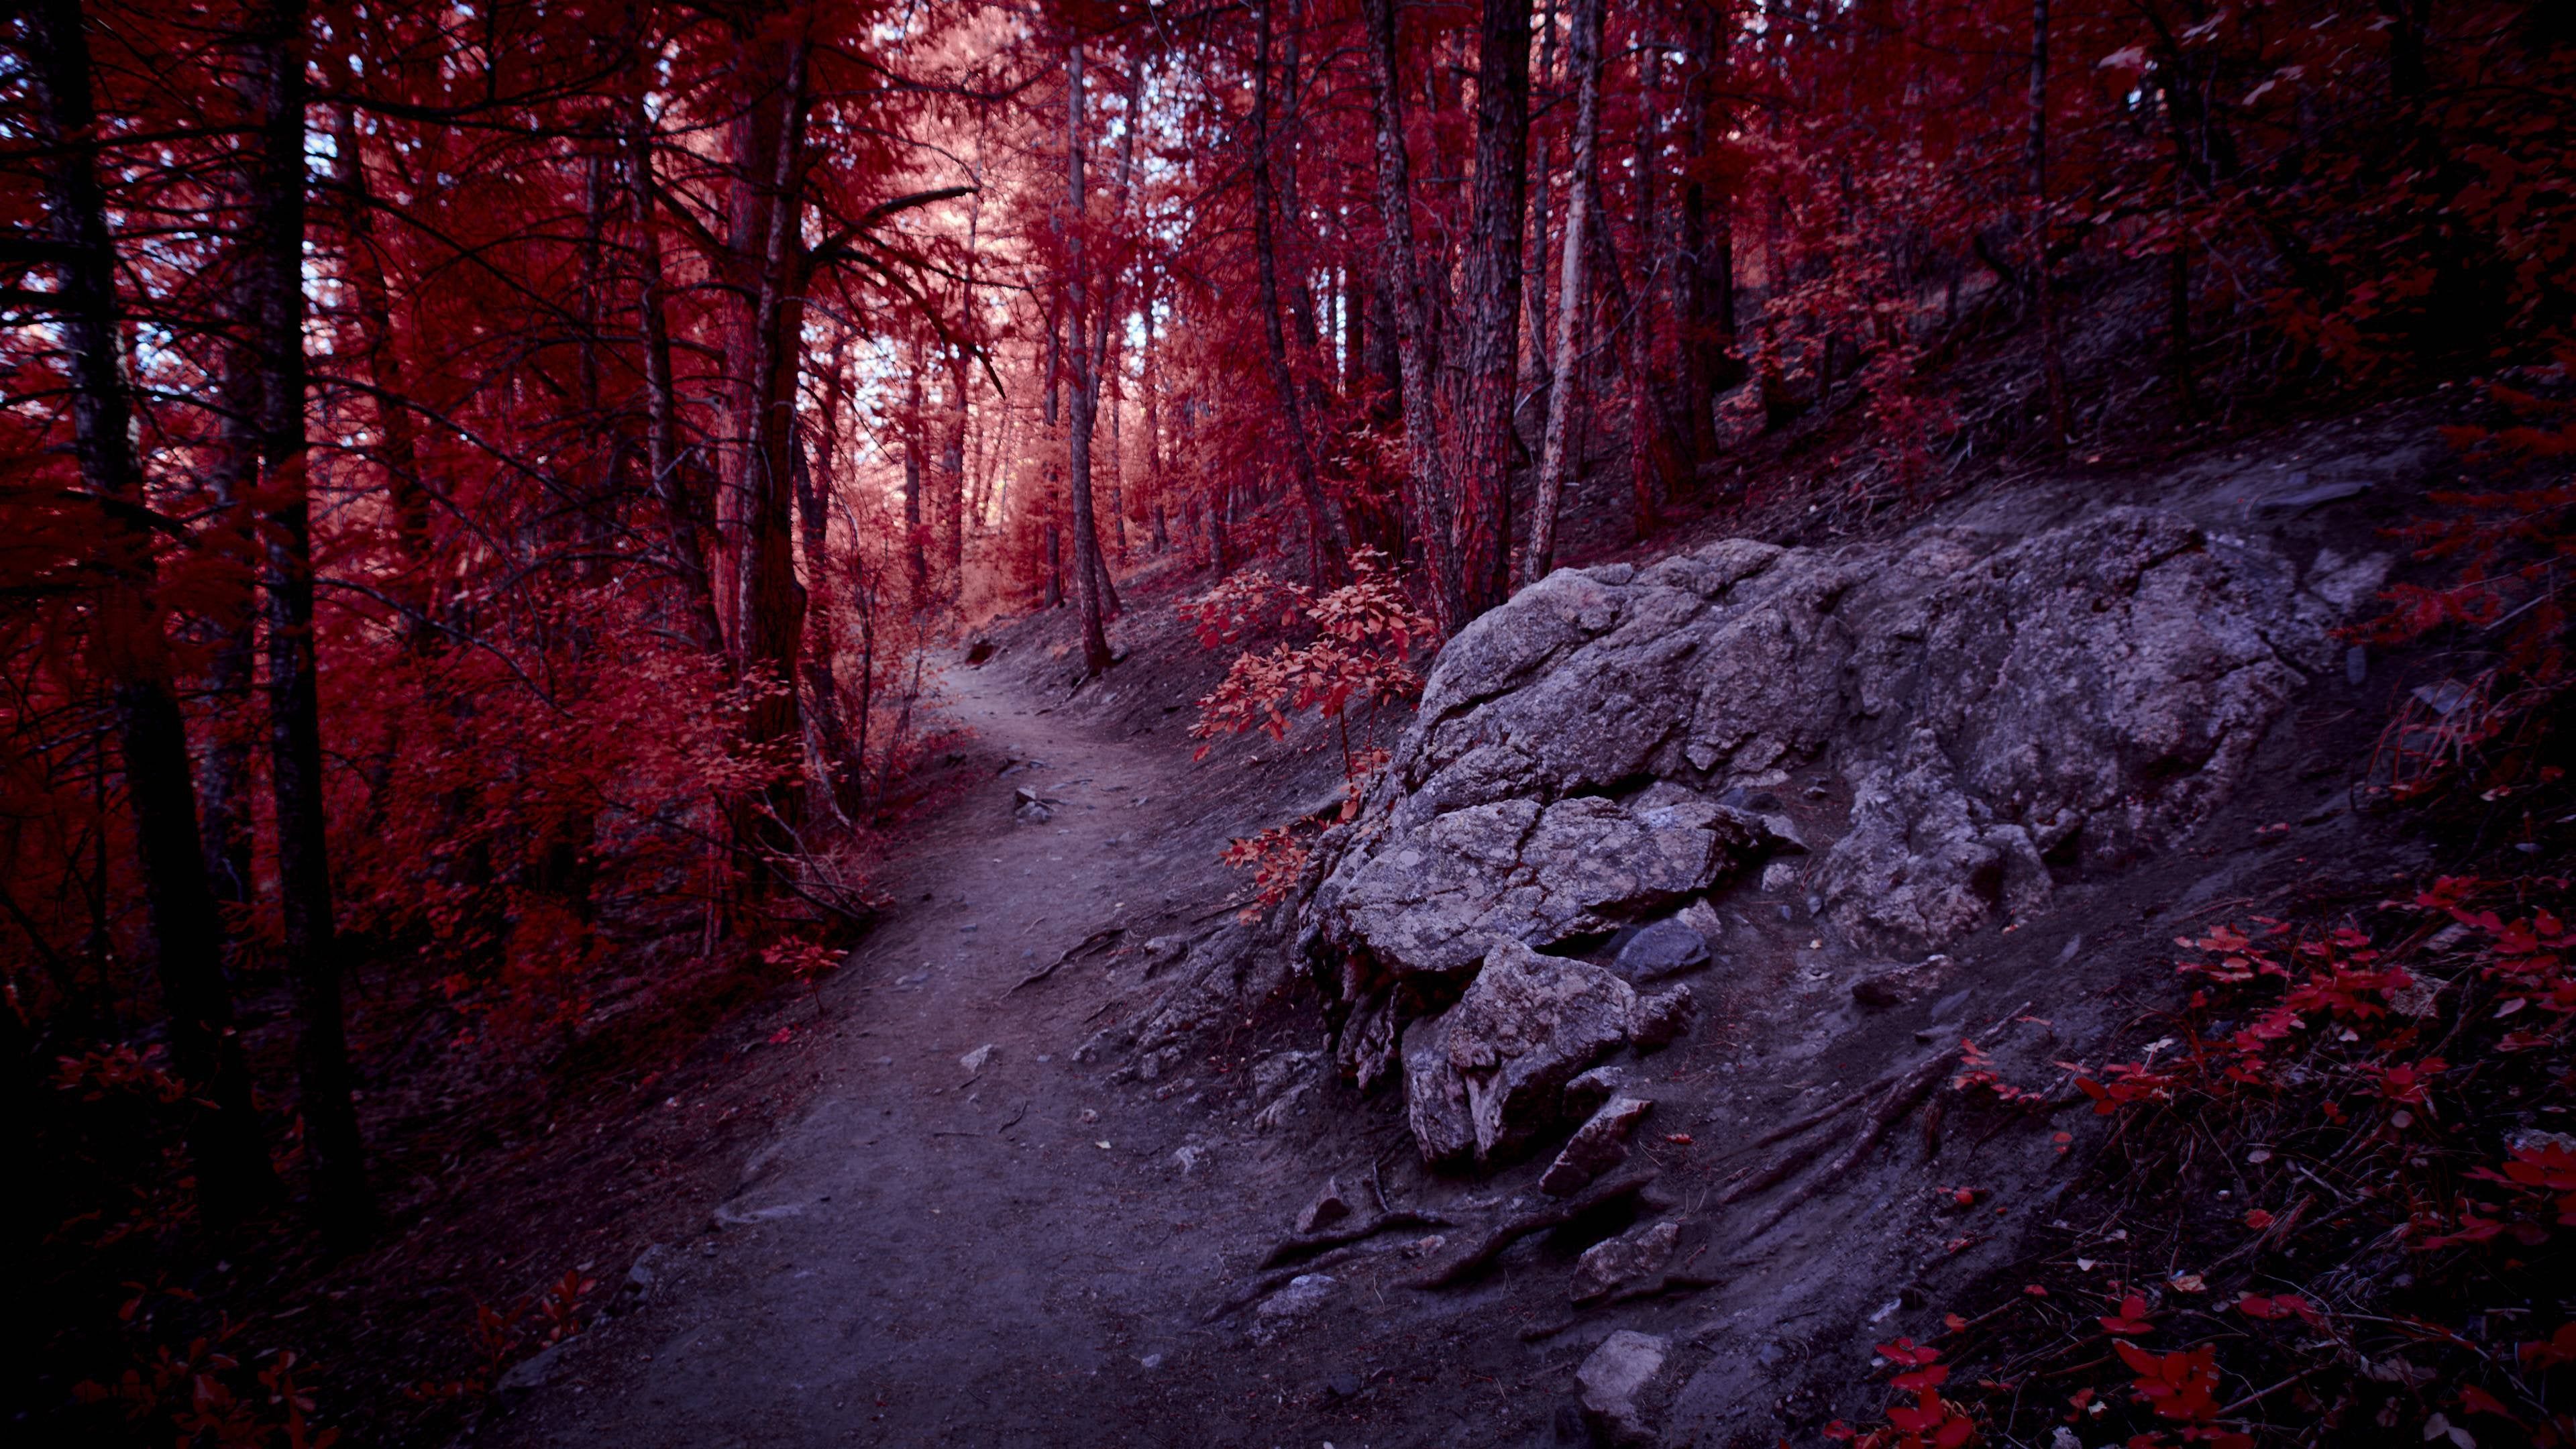 A trail winds through a forest of red trees. - Crimson